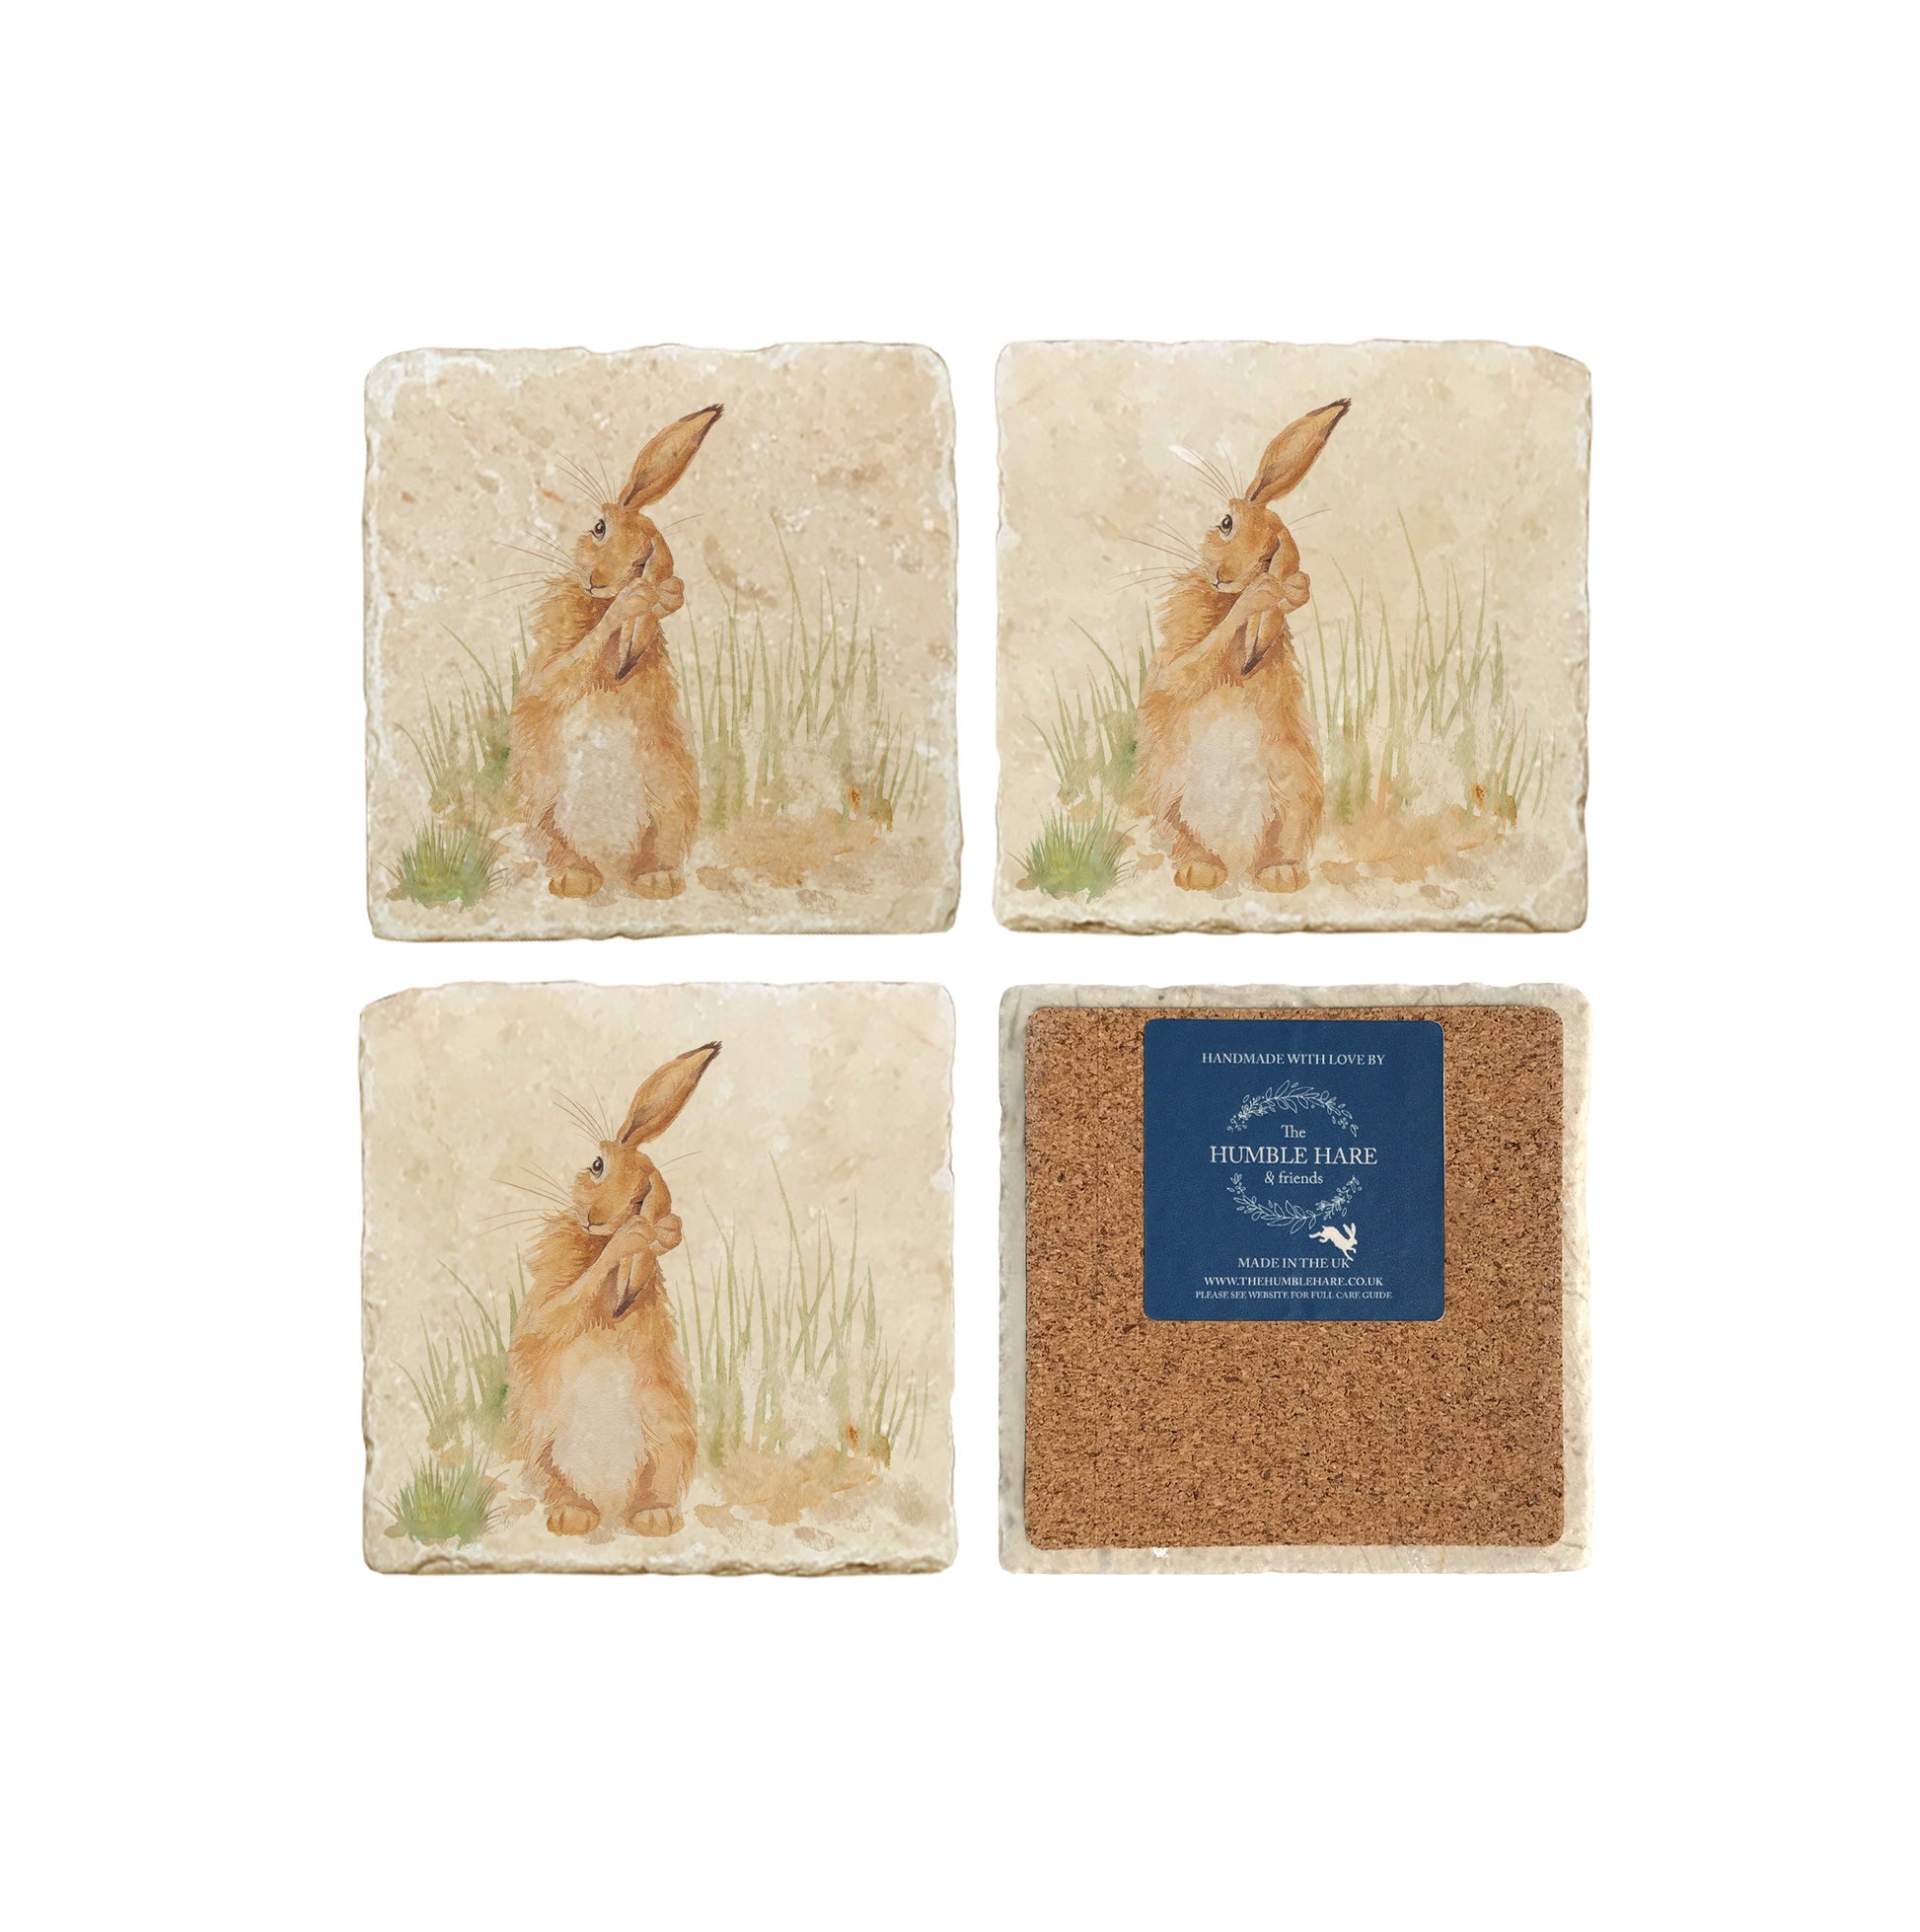 A set of 4 square marble coasters, featuring a watercolour design of a hare washing his ear in the English countryside. One coaster is flipped to show that the coasters are backed with cork.